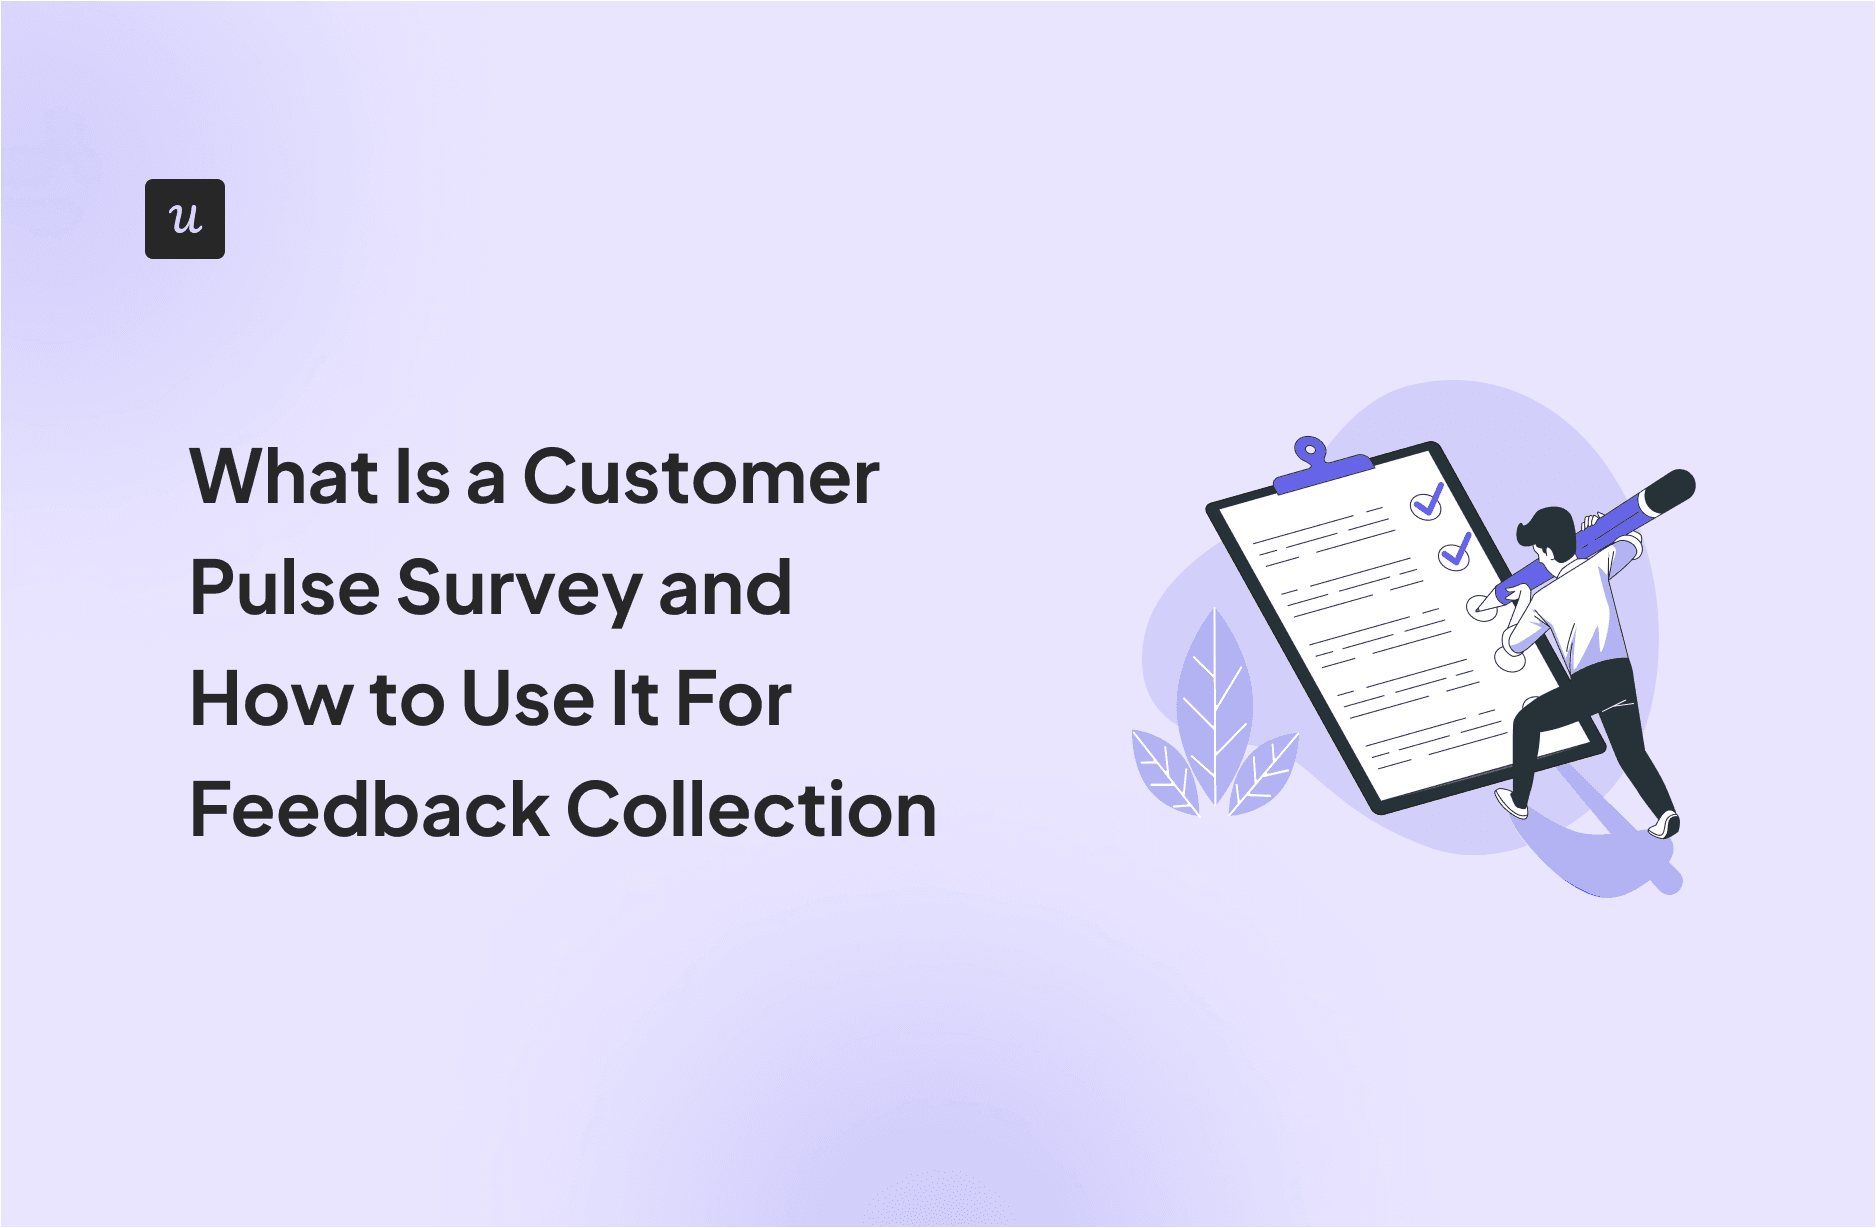 What Is a Customer Pulse Survey and How to Use It For Feedback Collection cover